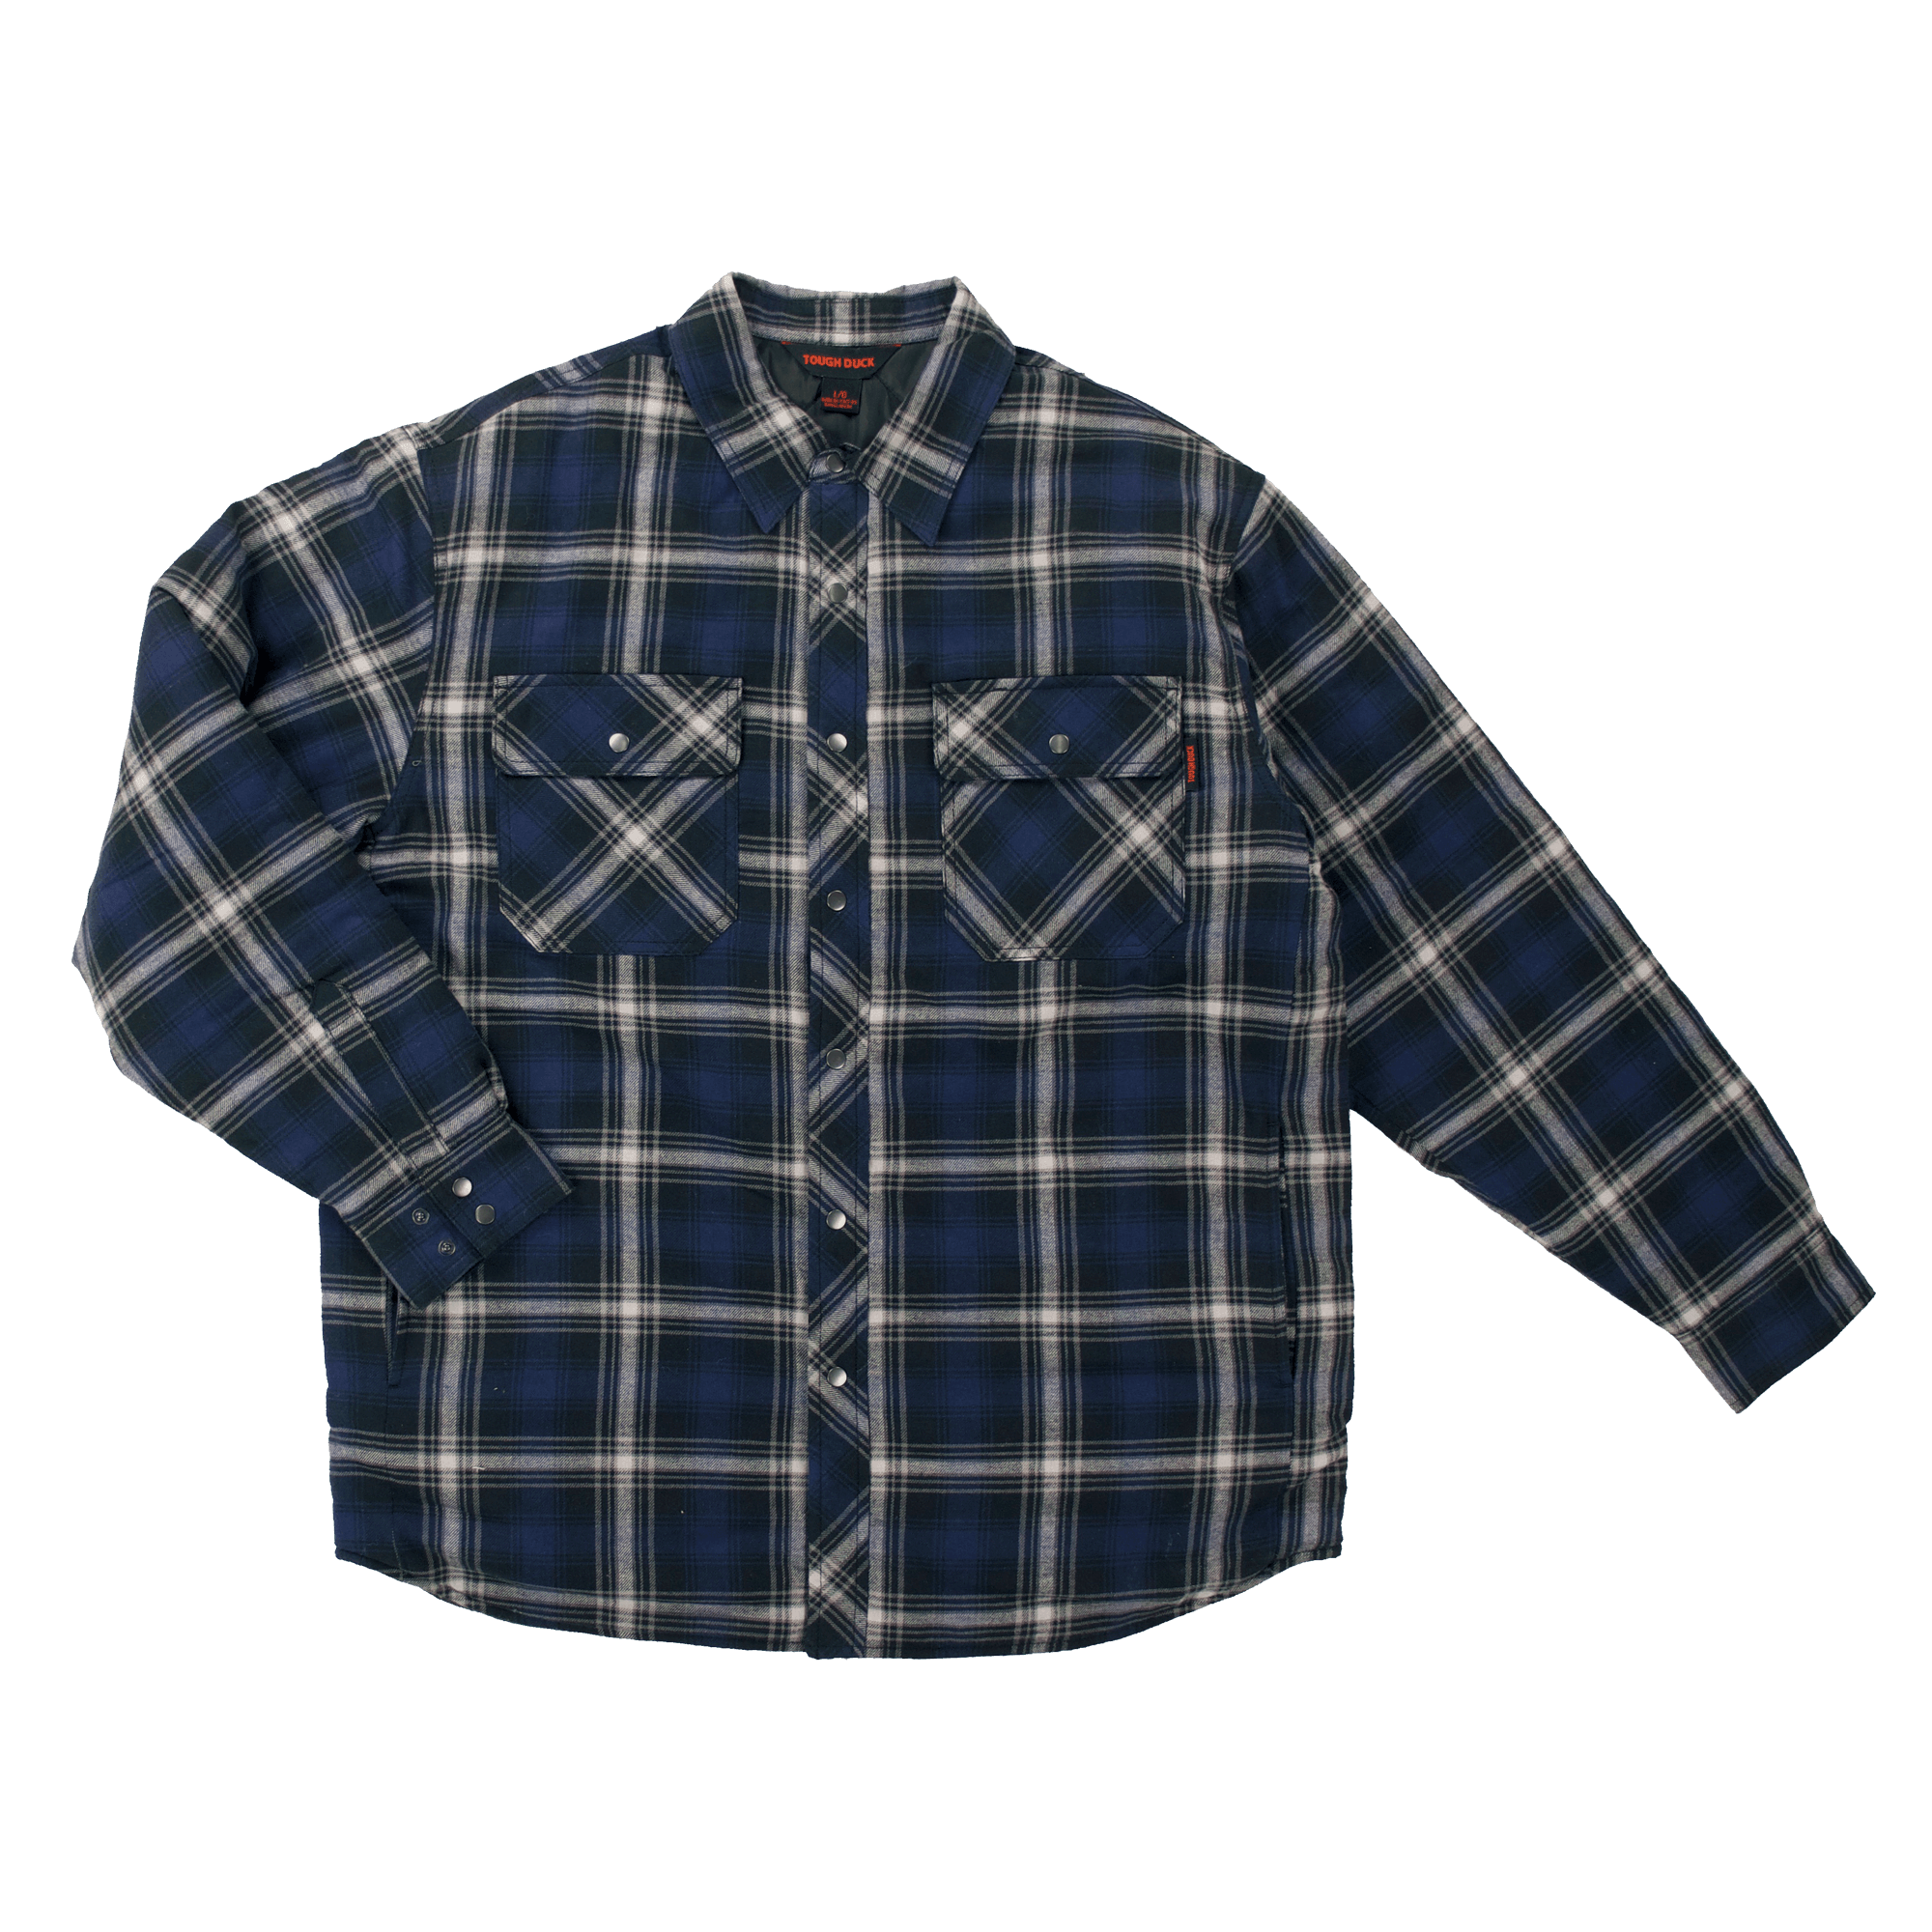 TOUGH DUCK QUILT LINED FLANNEL SHIRT - Mucksters Supply Corp